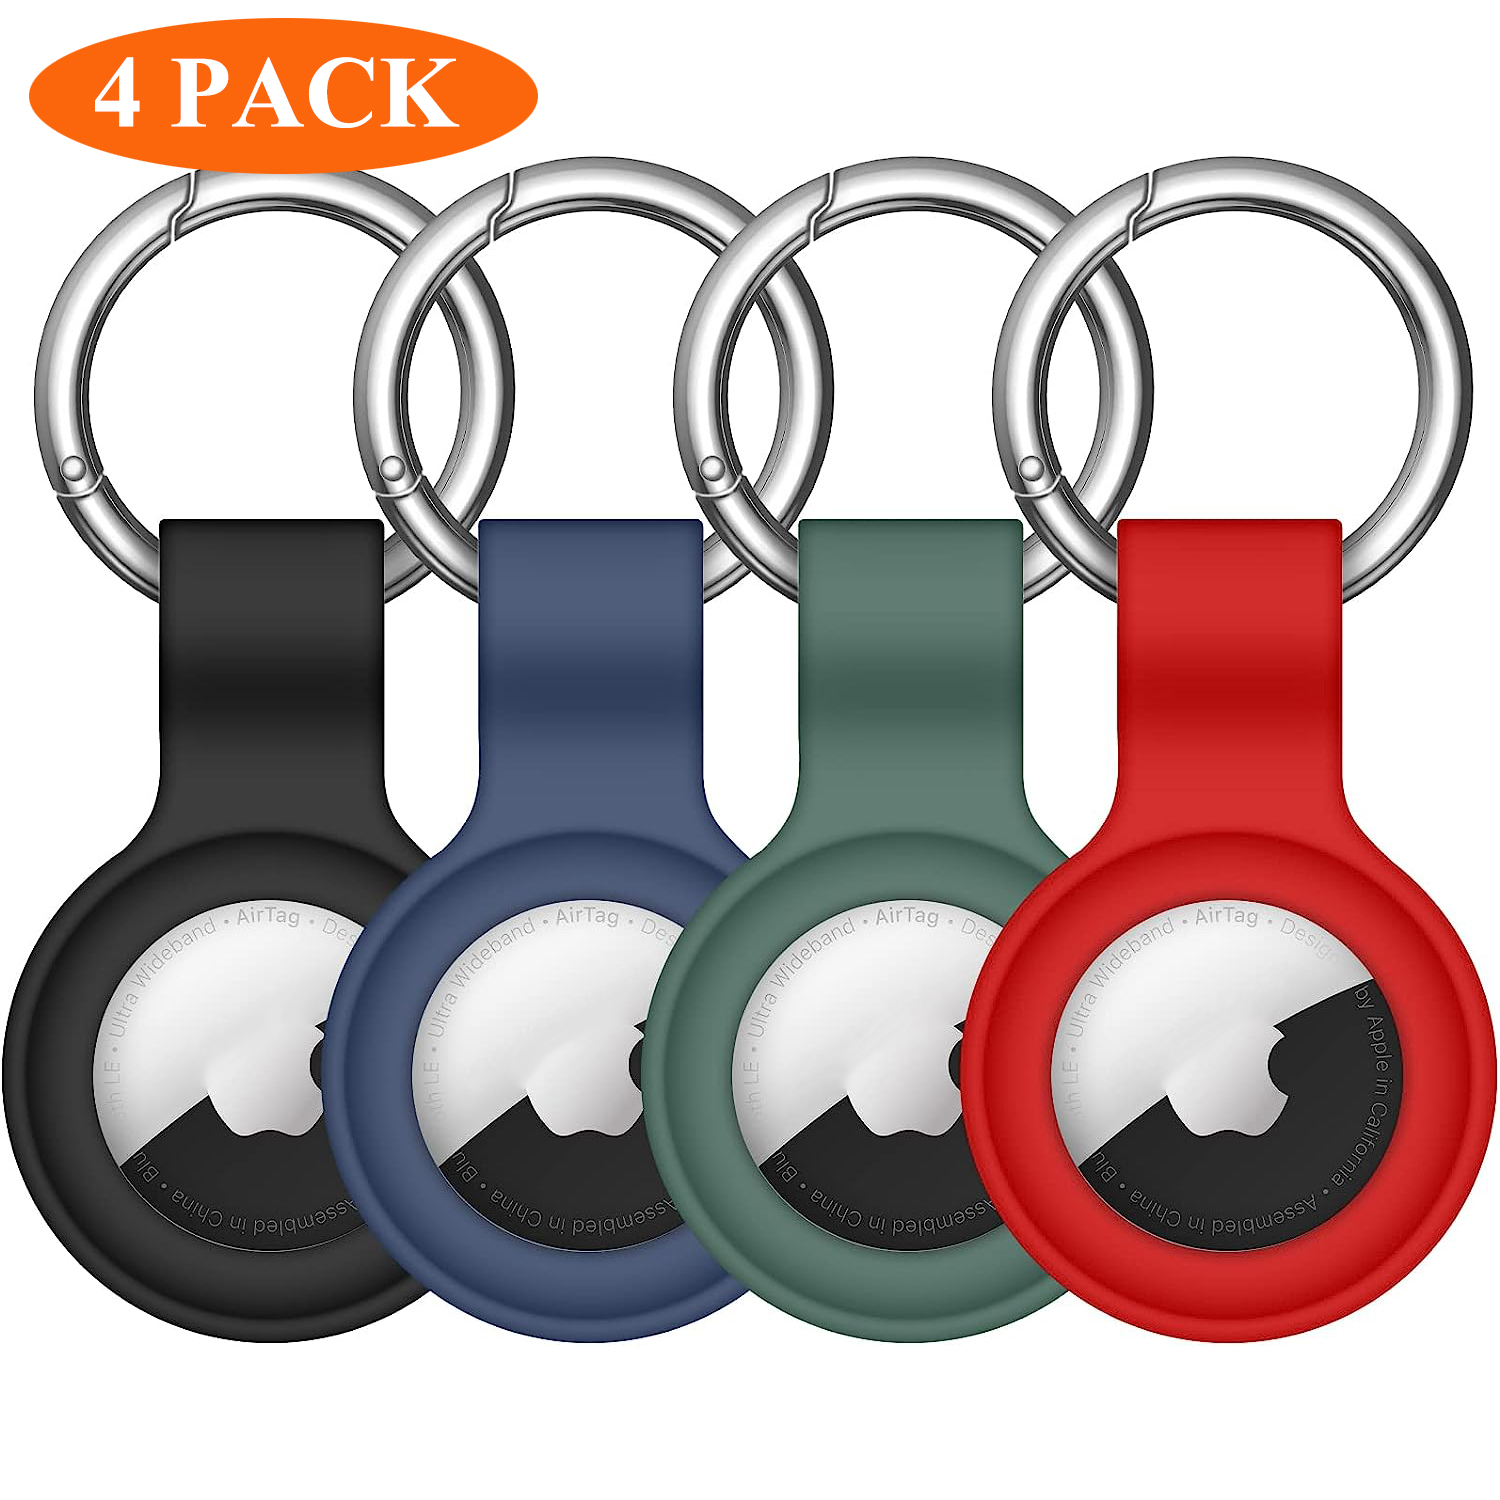 Case for AirTag Keychain, Metal Magnetic Protective Sleeve for Apple Airtags  Air tag Key Ring Holder Accessories for Luggage Wallet Dog Collar 